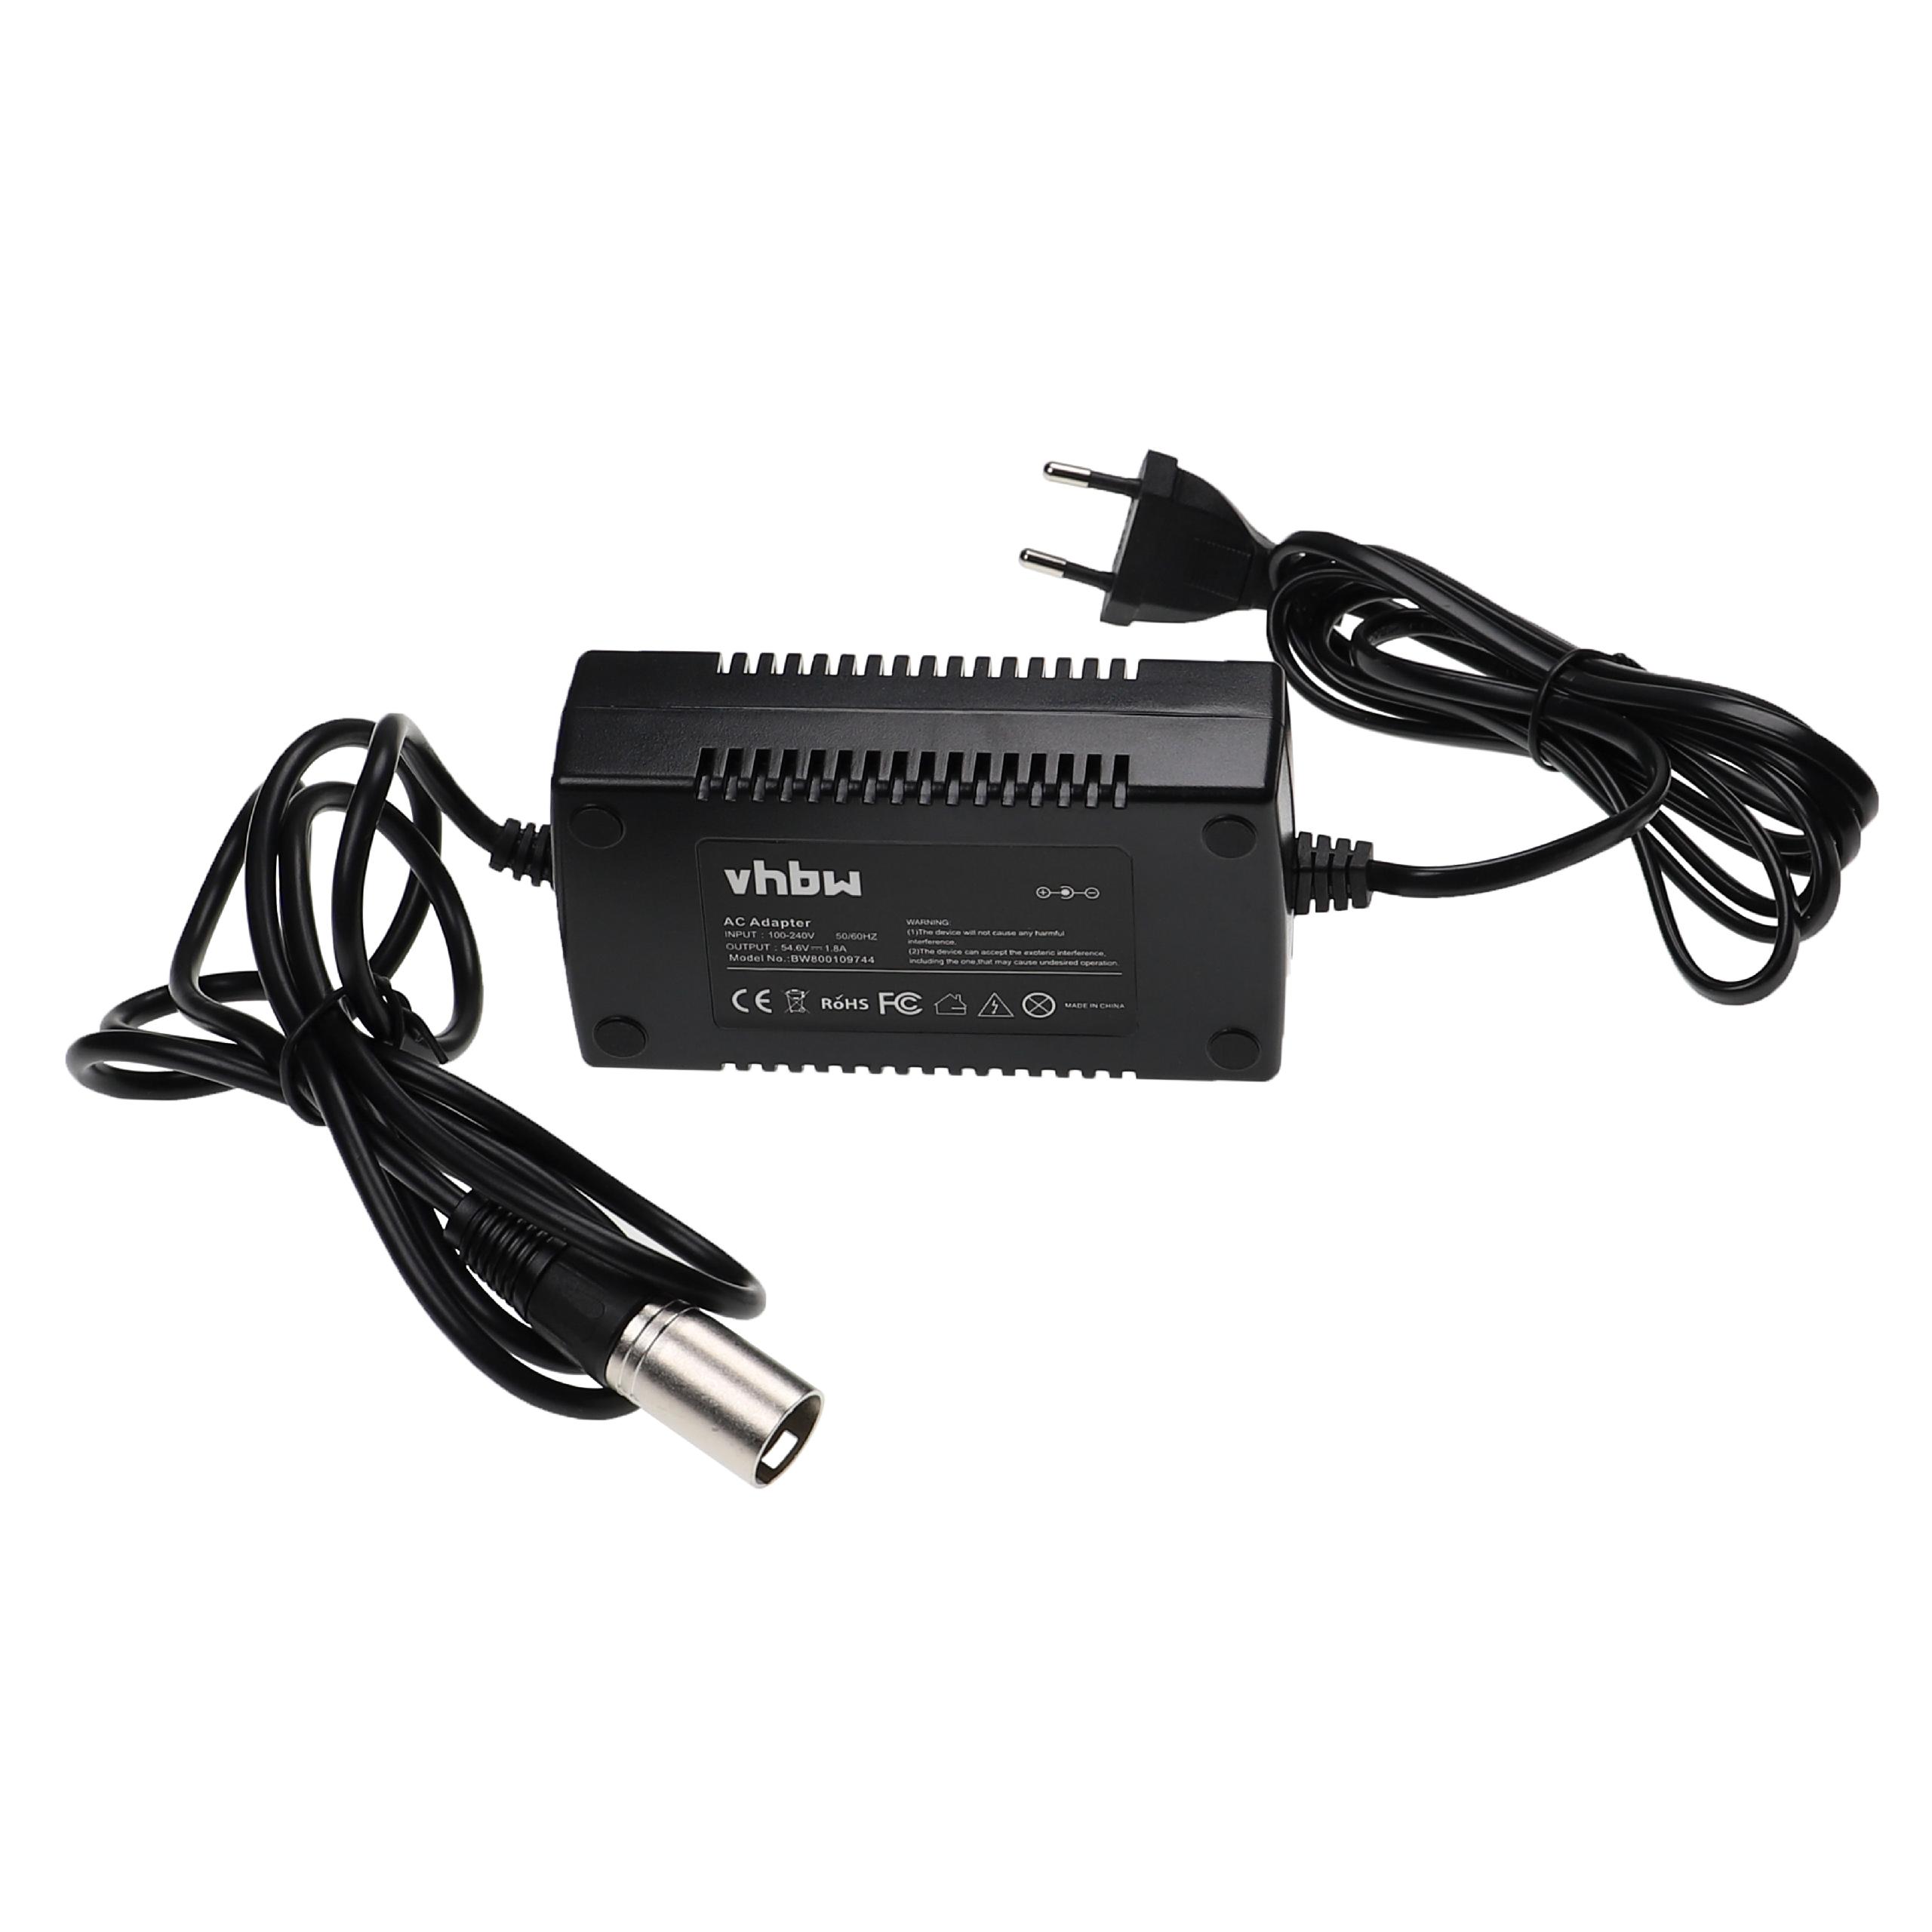 Charger suitable for E-Bike Battery - For 48 V Batteries, With XLR Connector, 1.8 A